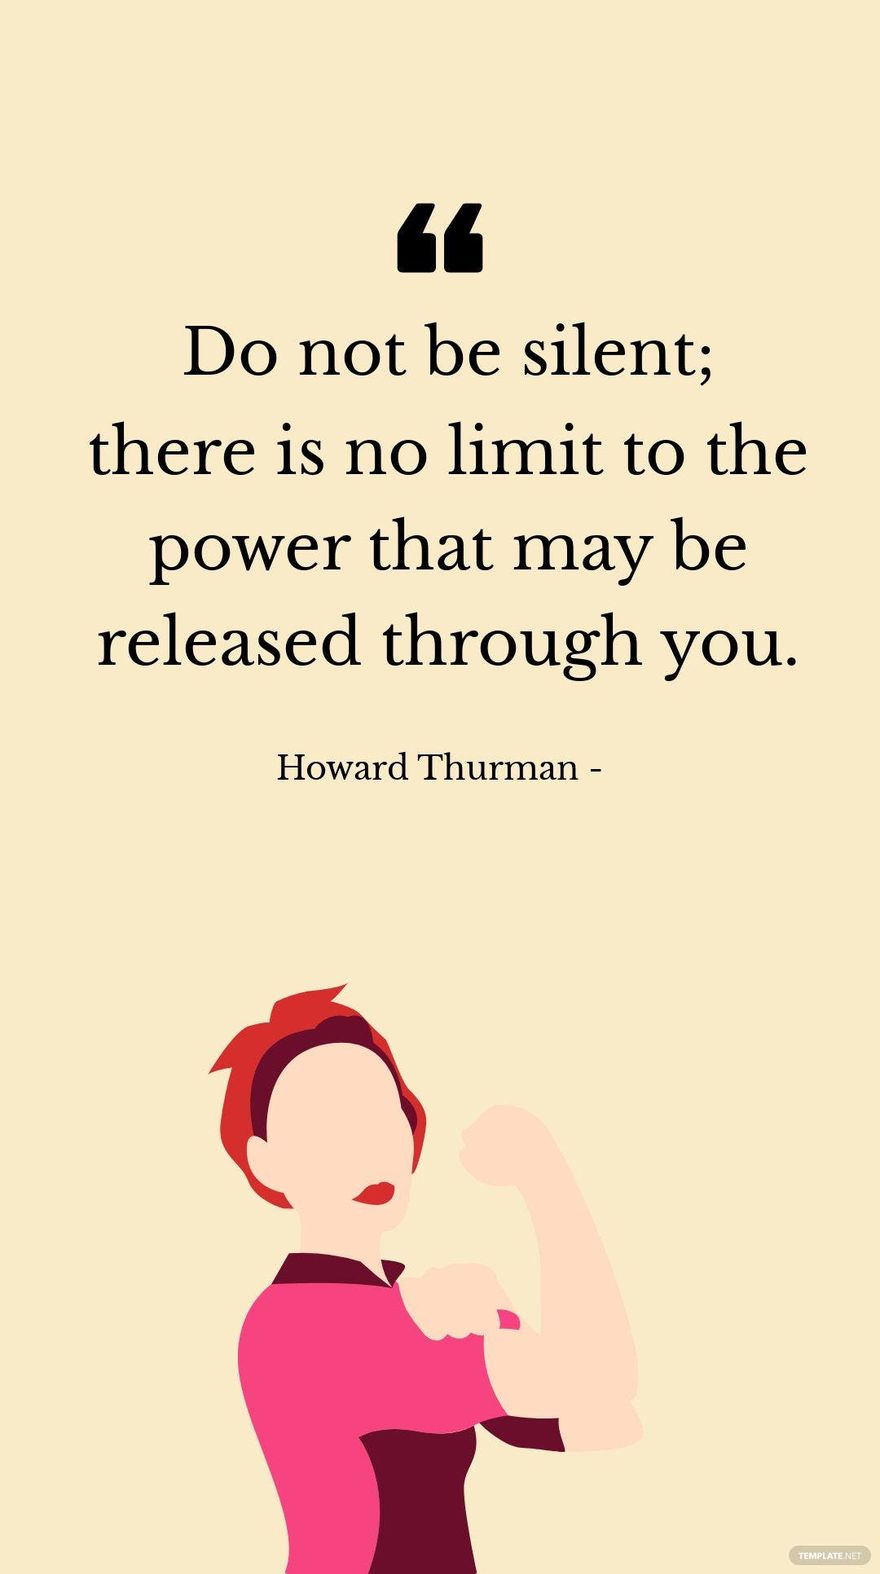 Free Howard Thurman - Do not be silent; there is no limit to the power that may be released through you. in JPG